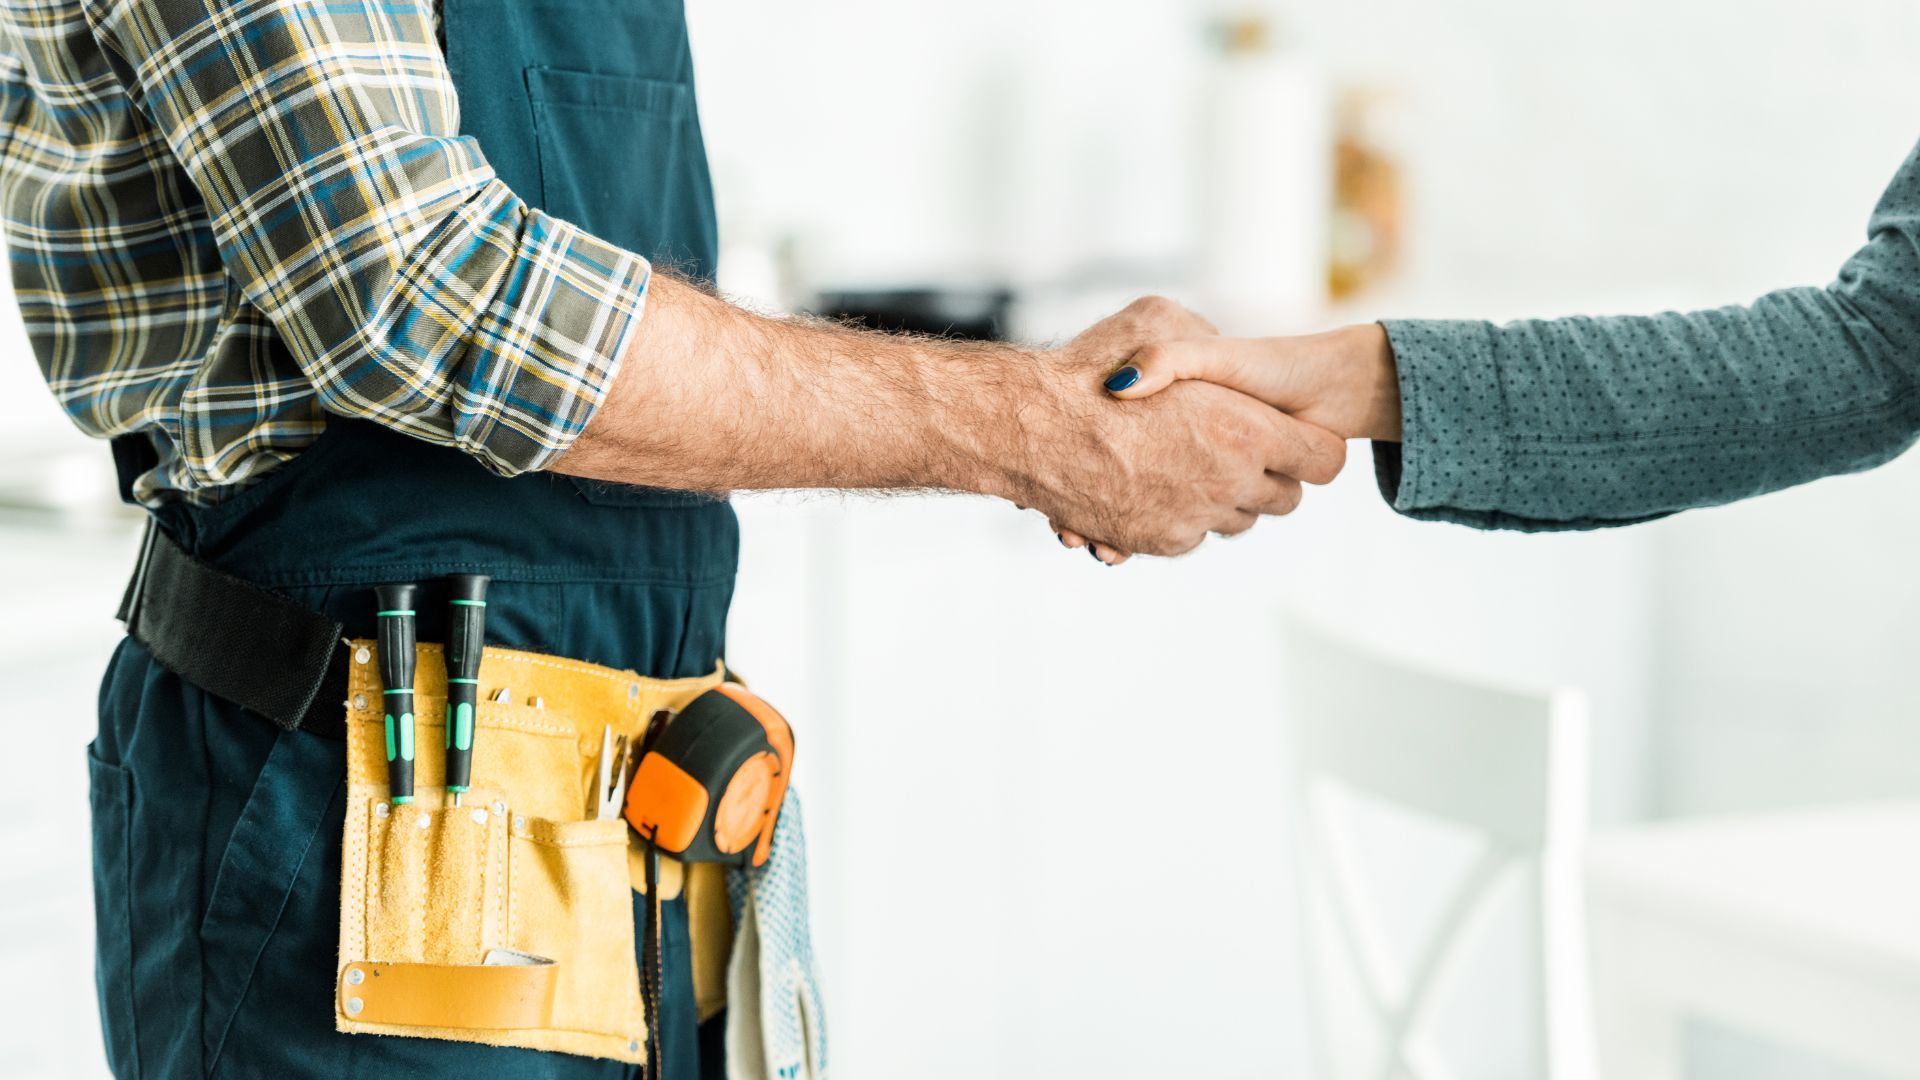 Plumber shaking hands with customer